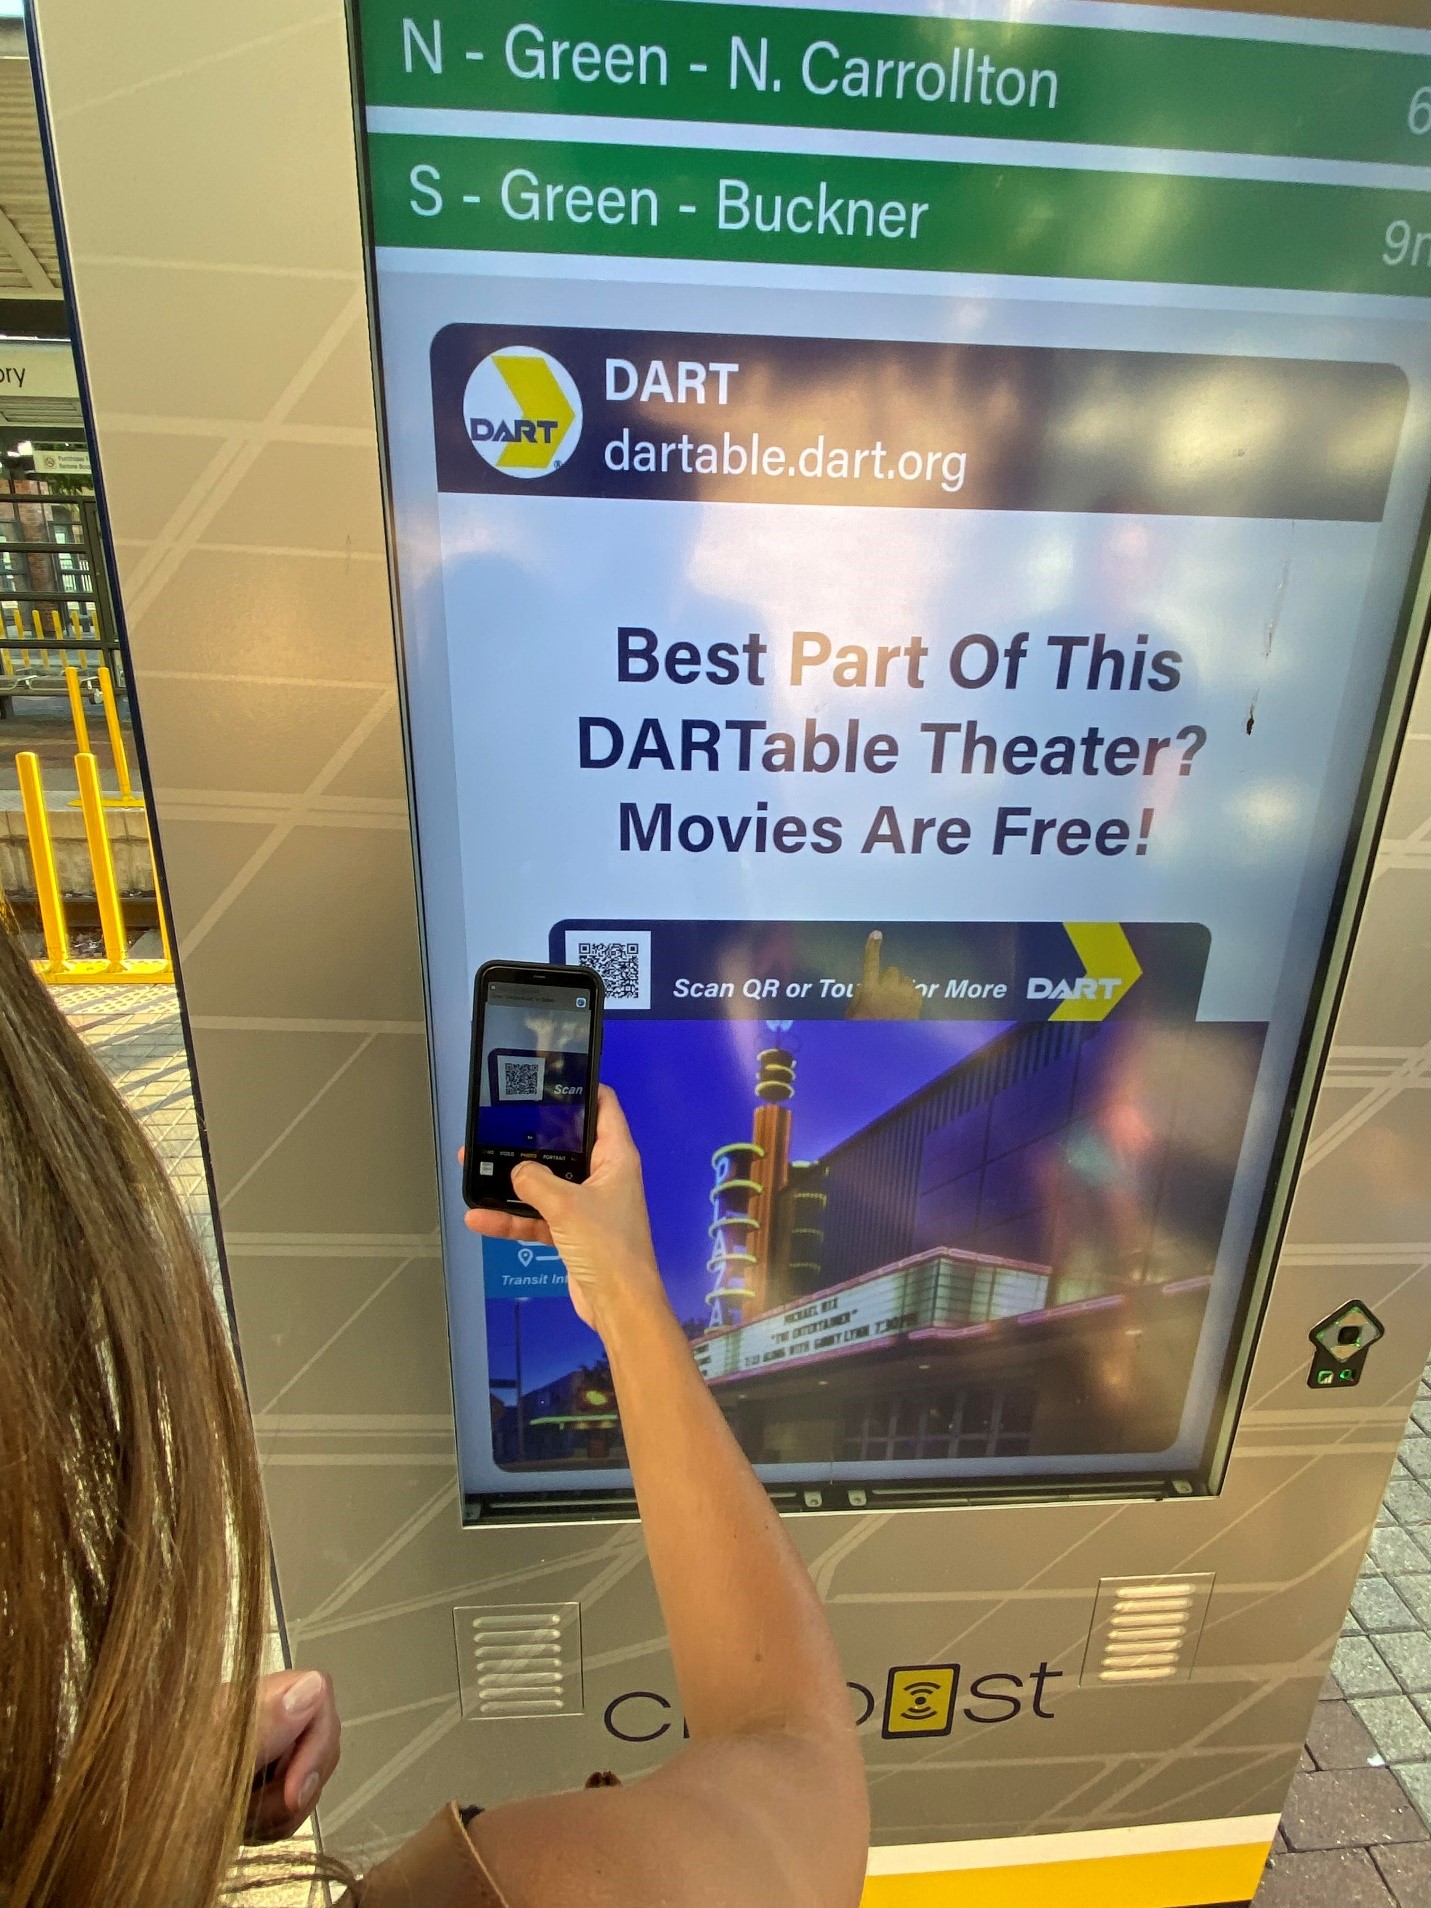 The system upgrade makes the DART information contactless and viewable from mobile devices through embedded QR code activation.